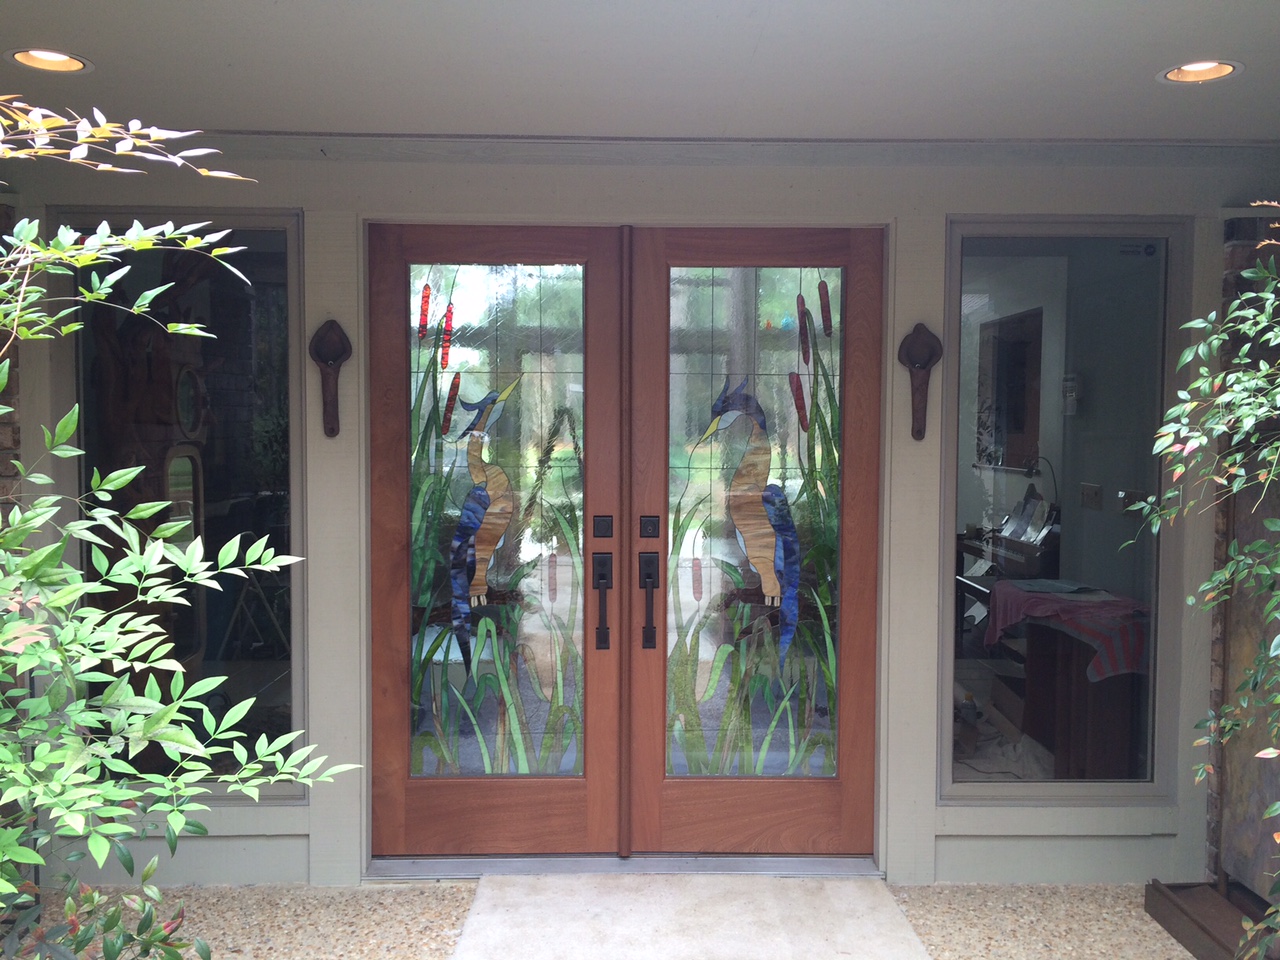 Incredible Entryway Transformation With Our Impact Resistant Stained Glass Door Inserts (After)